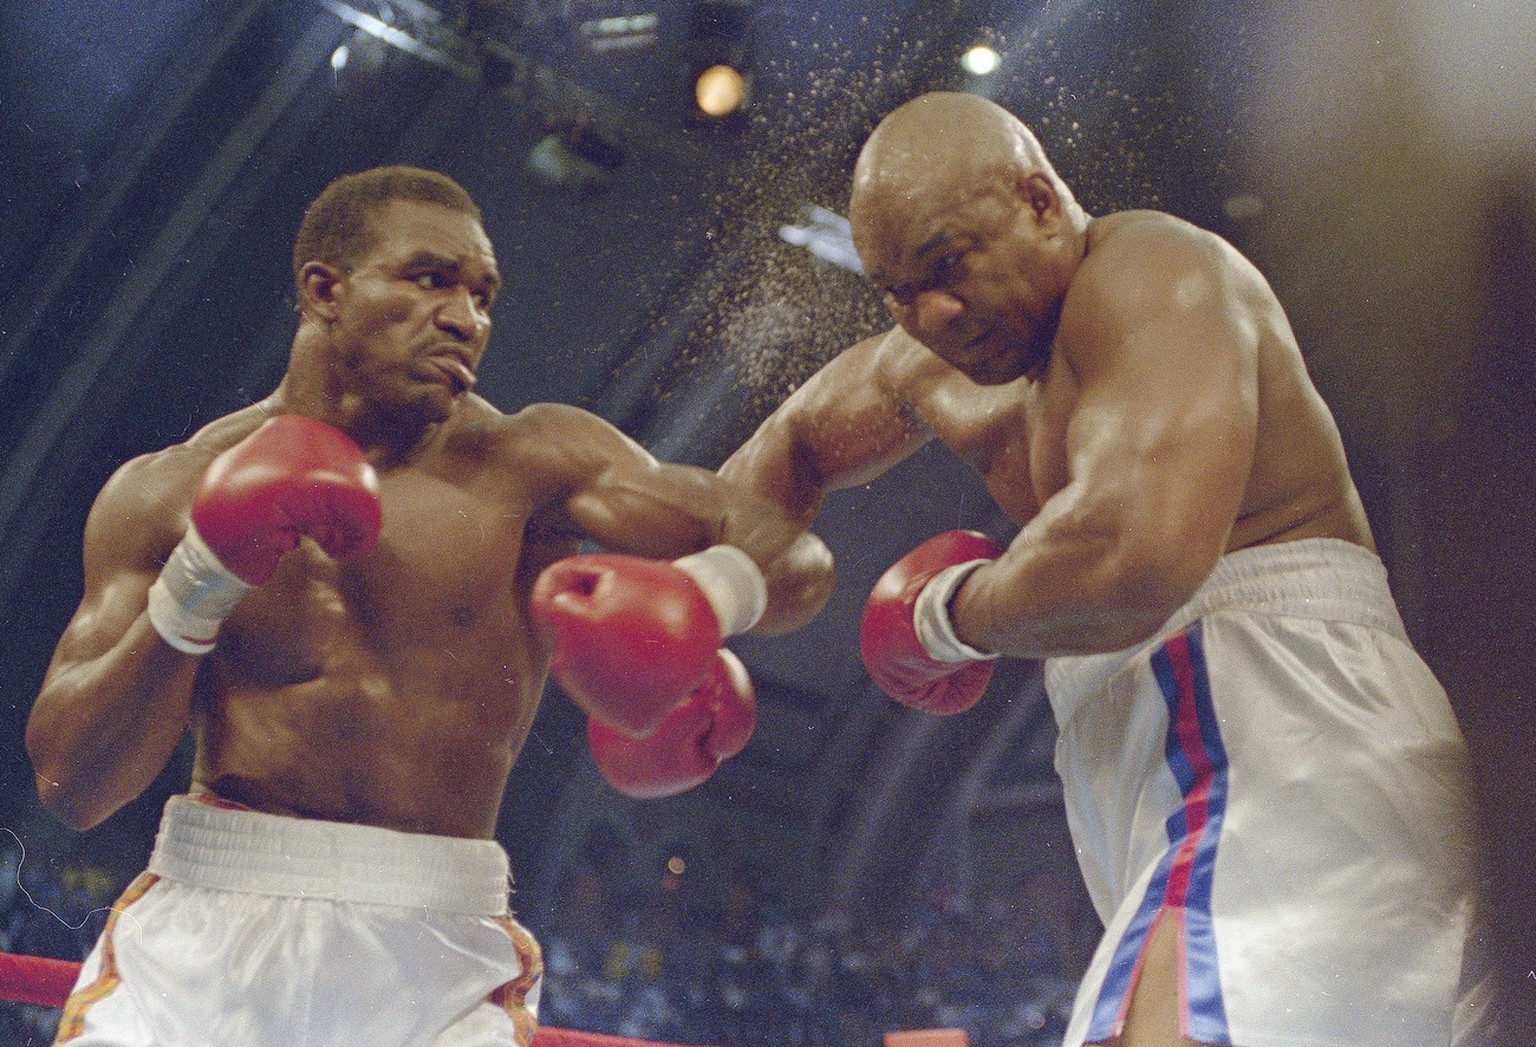 Heavyweight champion Evander Holyfield, left, lands a punch on George Foreman in their 12-round bout, April 19, 1991, in Convention Hall, Atlantic City, New Jersey. (AP Photo)